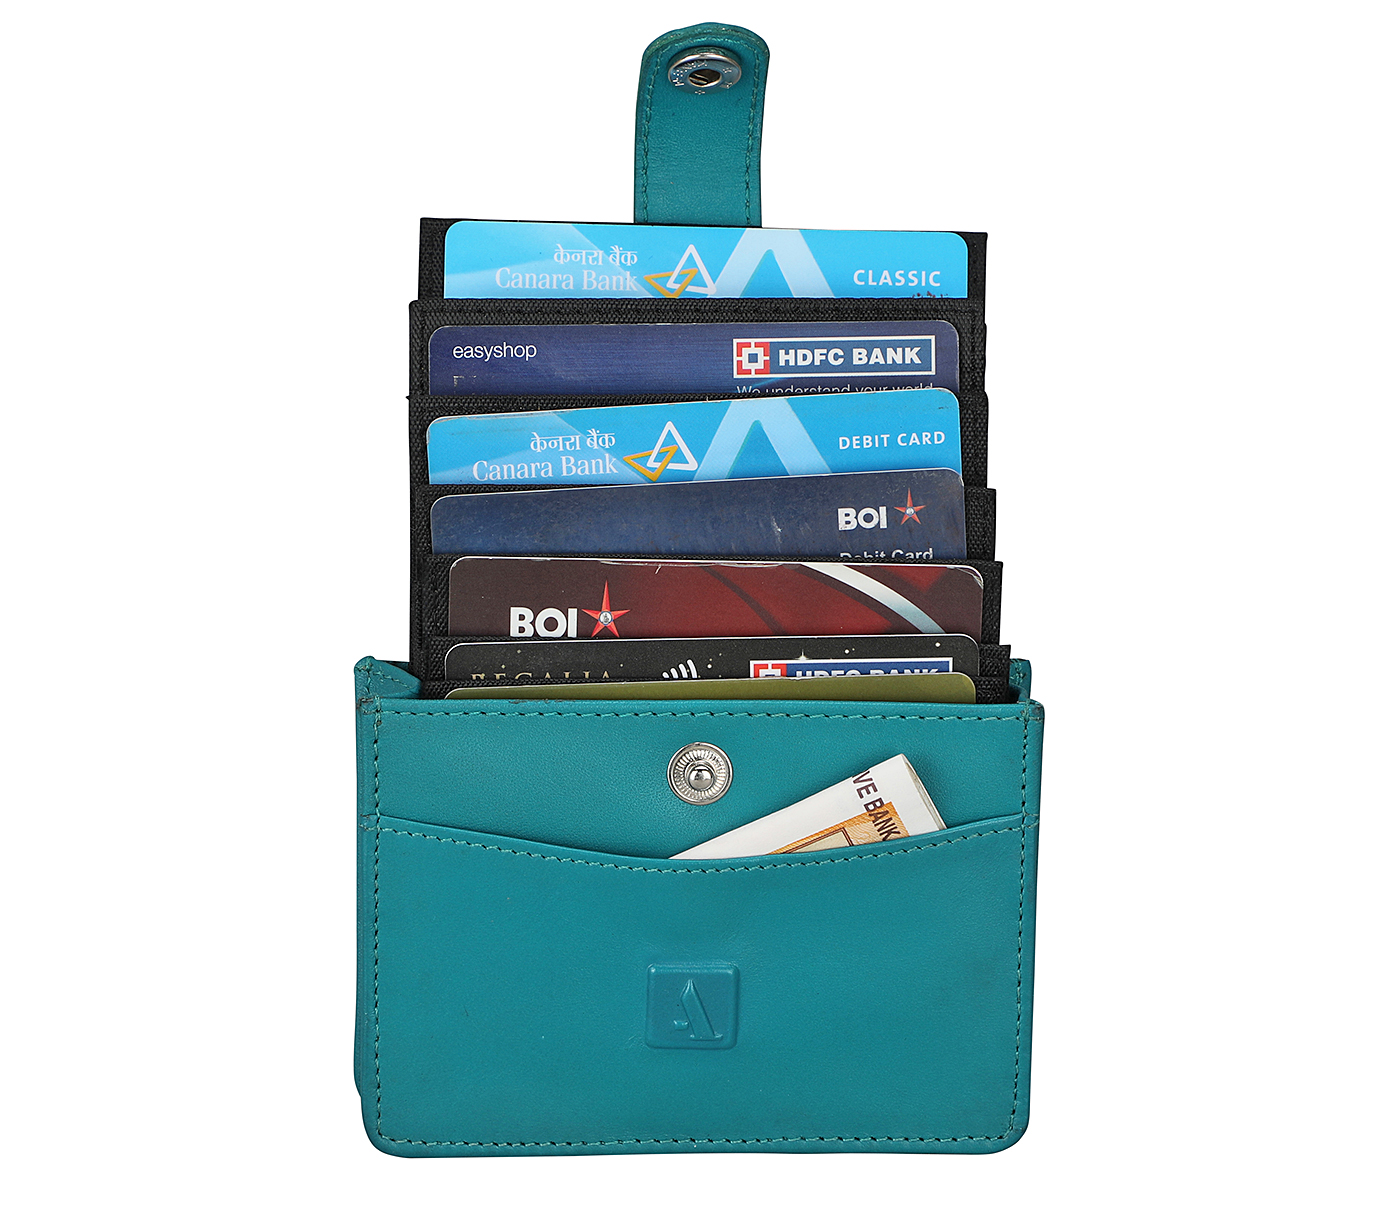 W344-Adamis-Blue Colour Pure Leather Card Case - Green